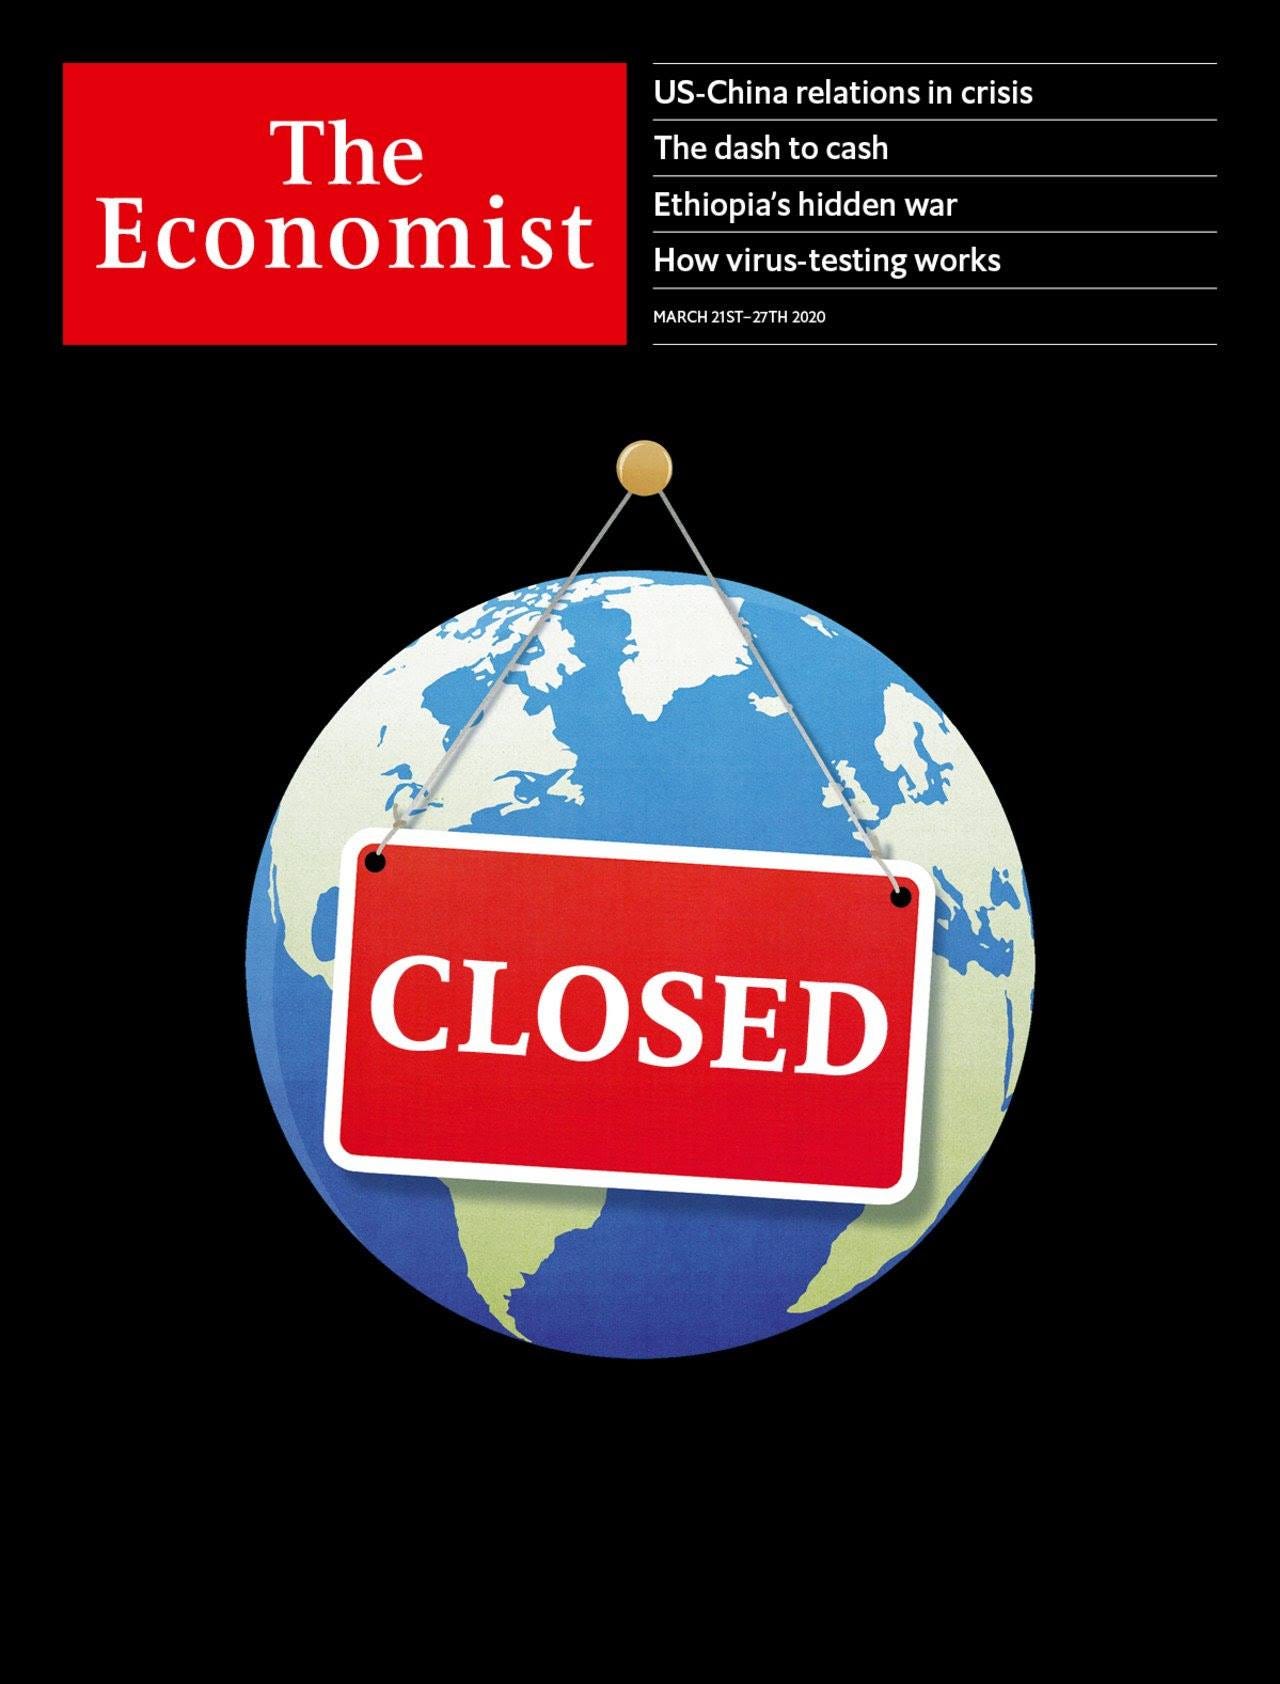 May be an image of text that says 'US- China relations The dash to cash crisis The Economist Ethiopia's hidden war How virus-testing works MARCH 27TH2020 CLOSED'